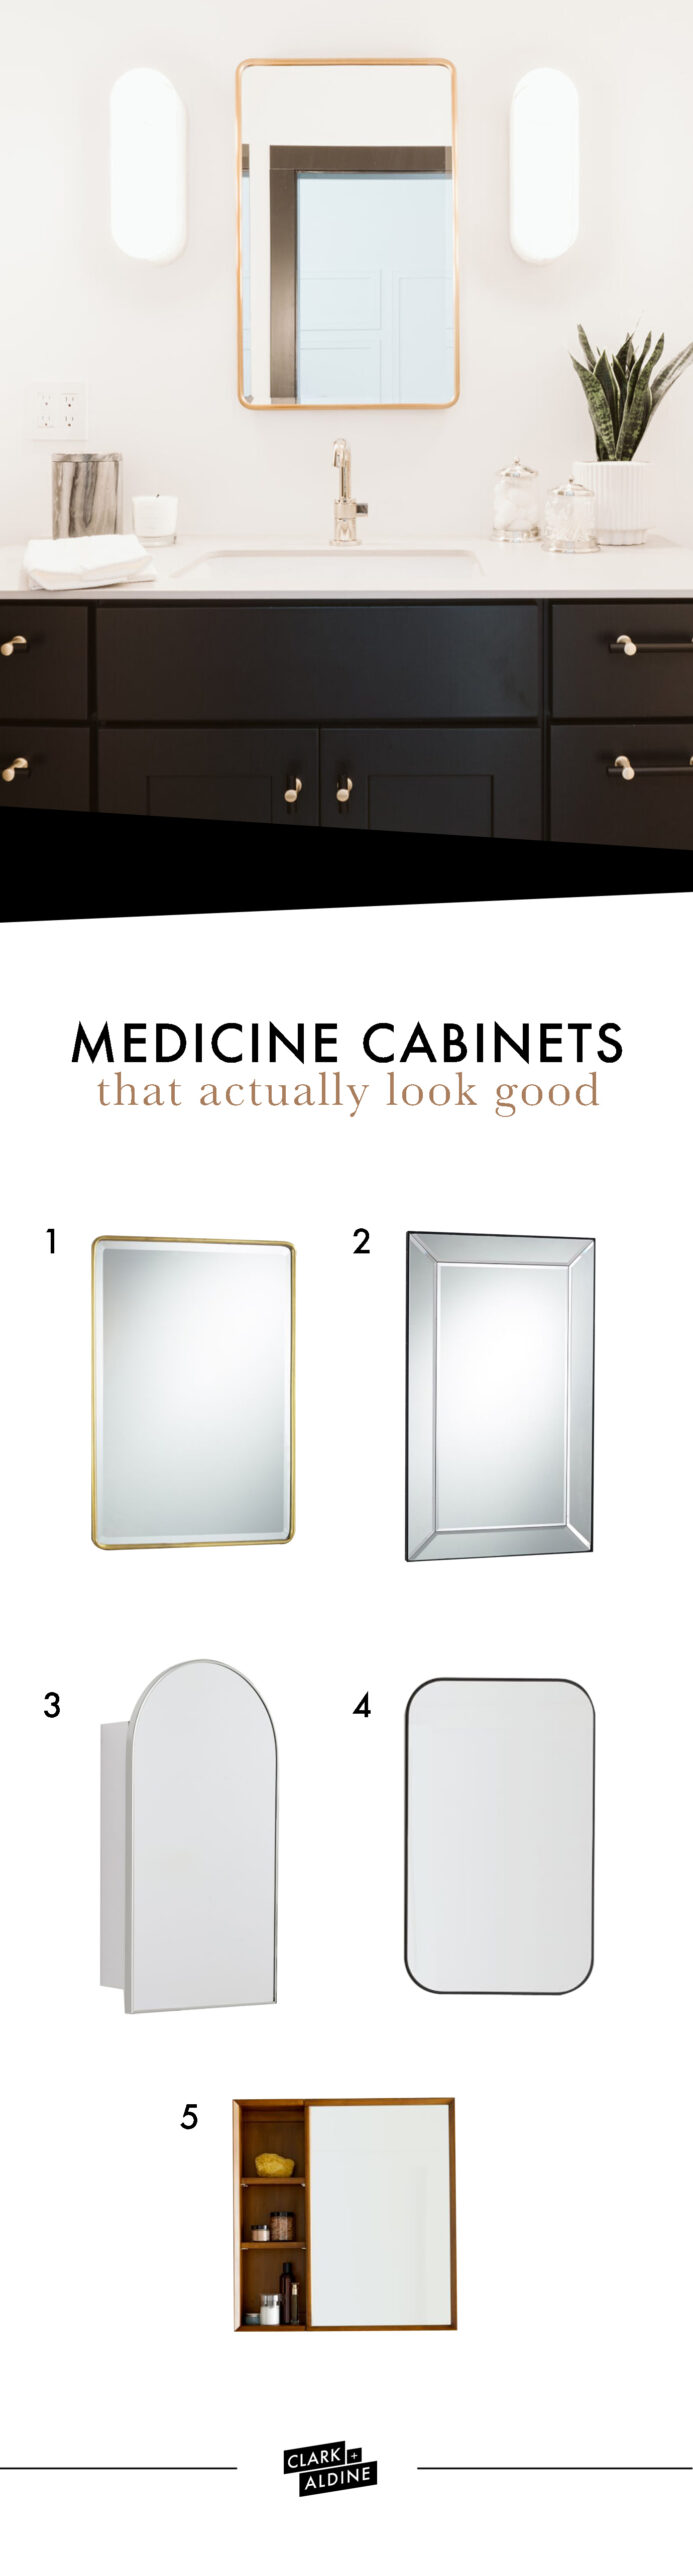 MEDICINE CABINET MIRRORS THAT ACTUALLY LOOK GOOD image 1